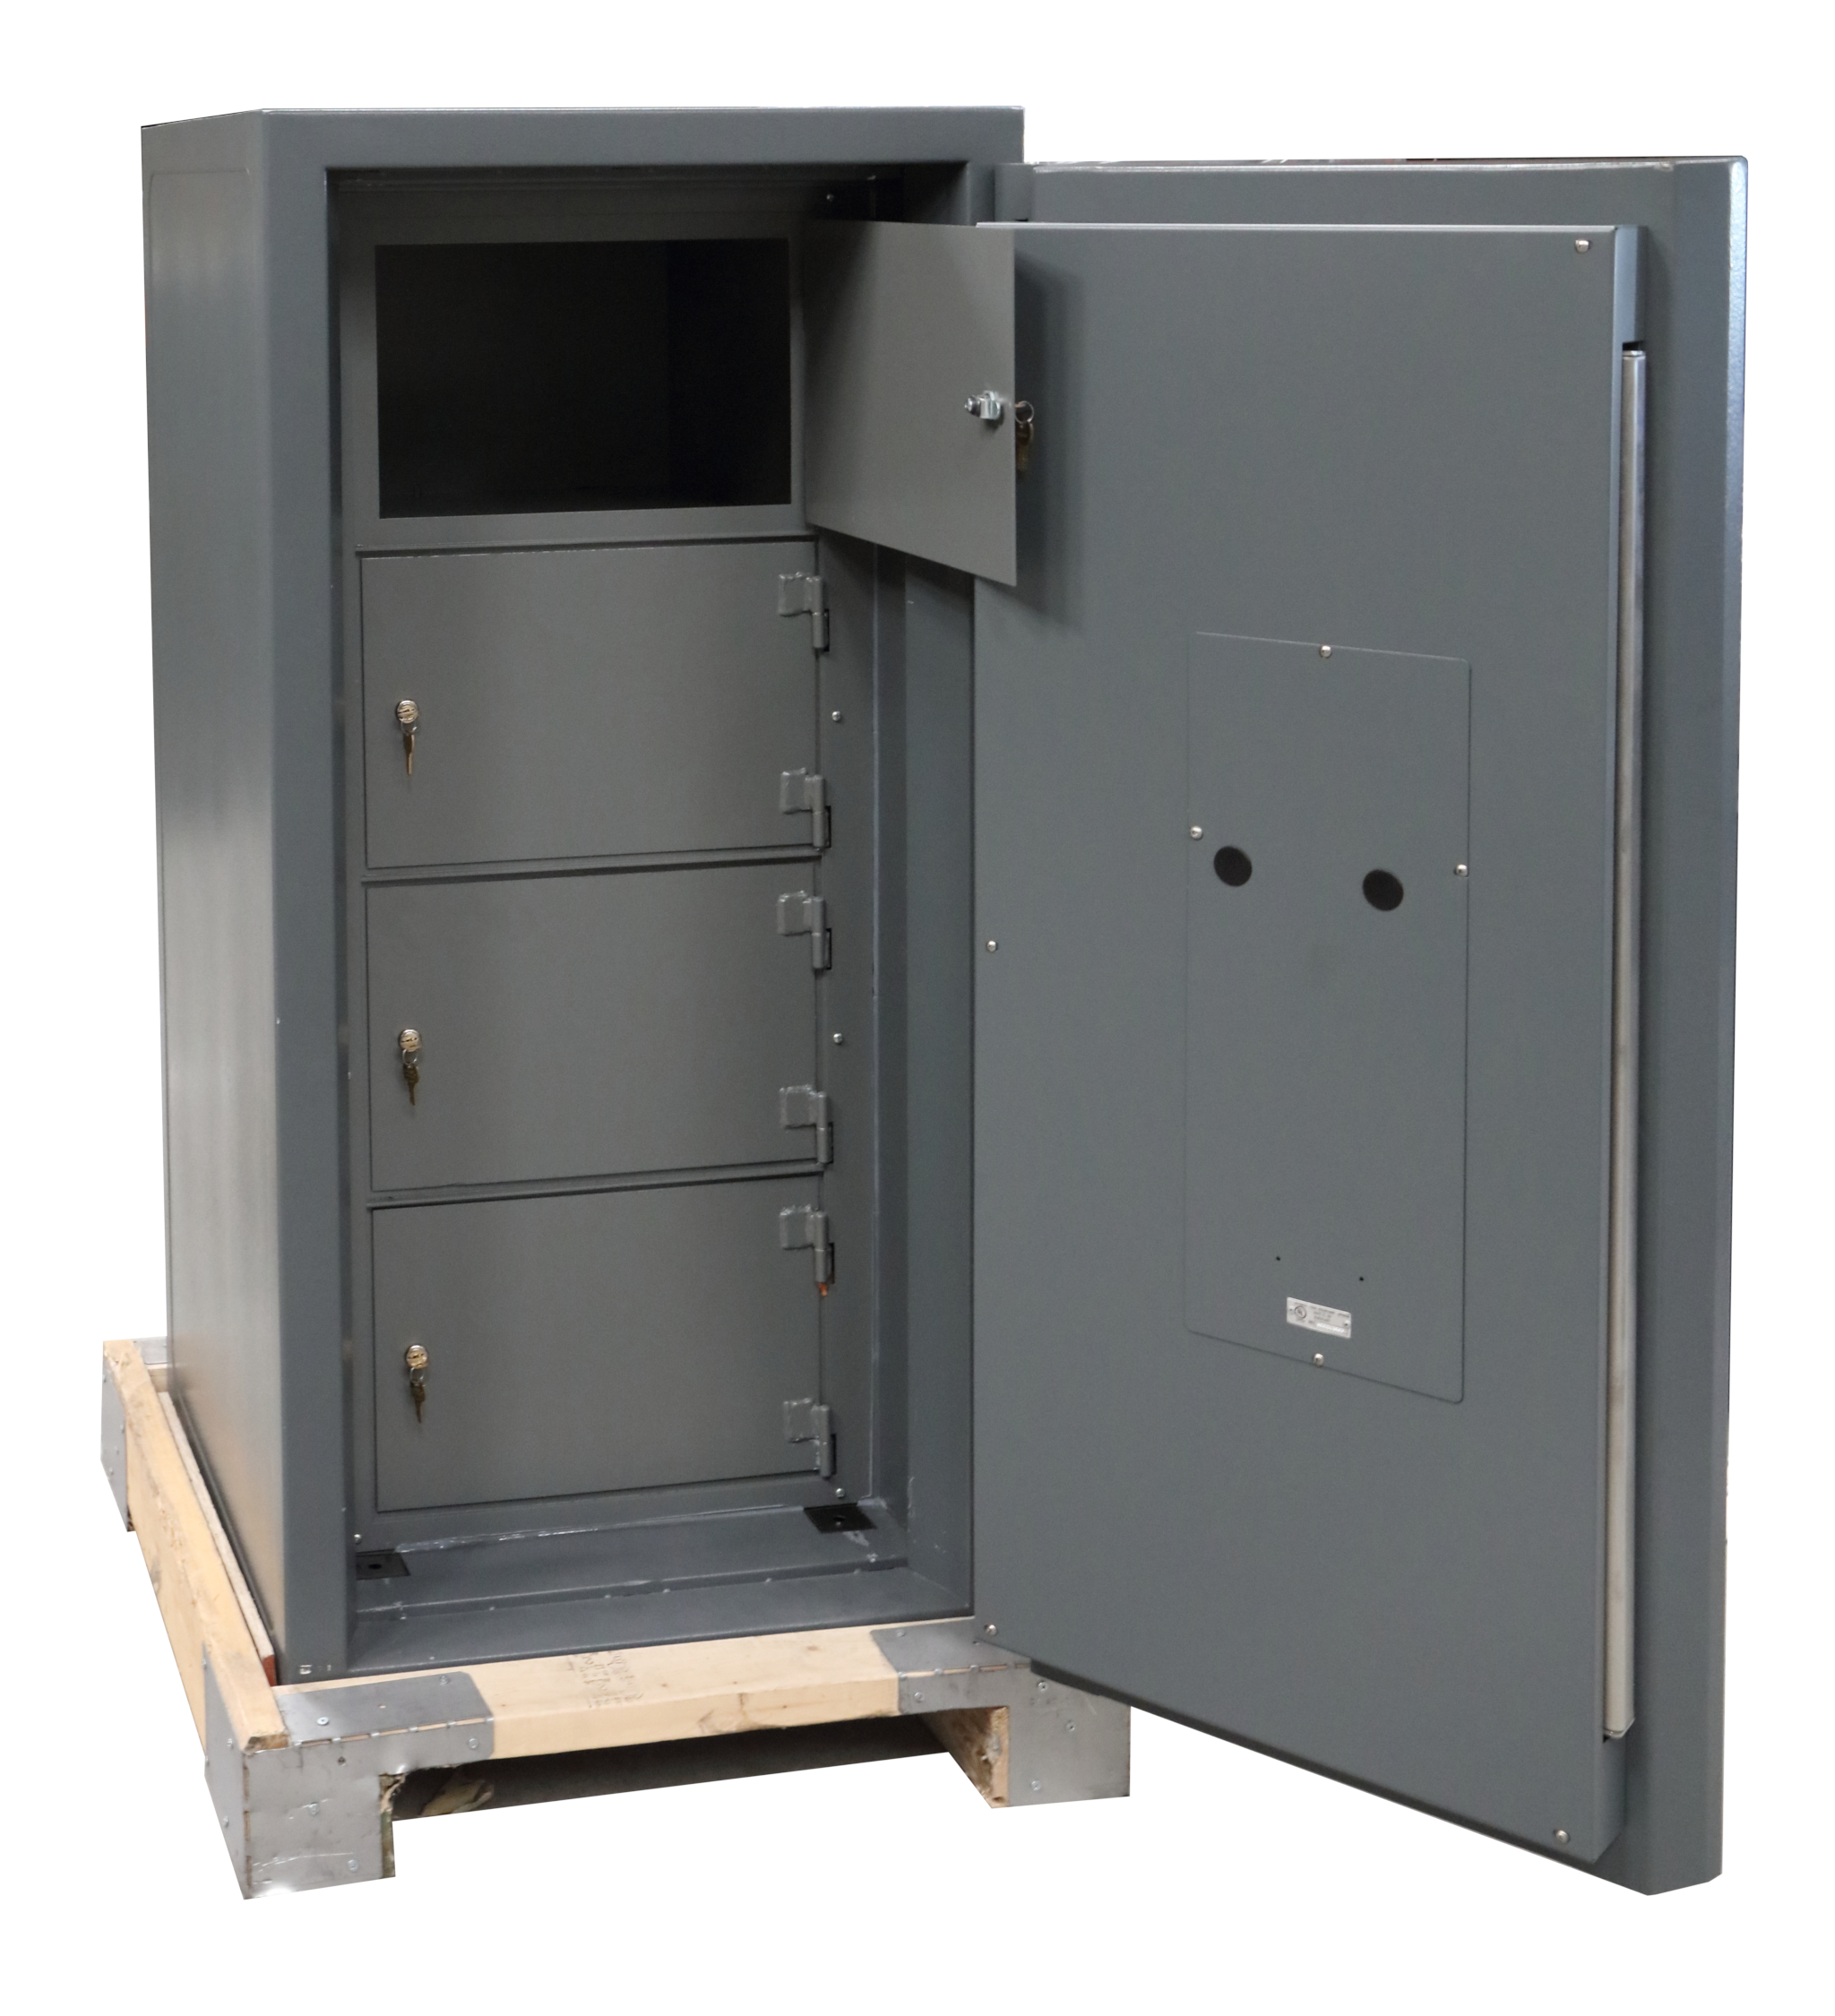 UL listed Burglary Resistant Safe with compartments